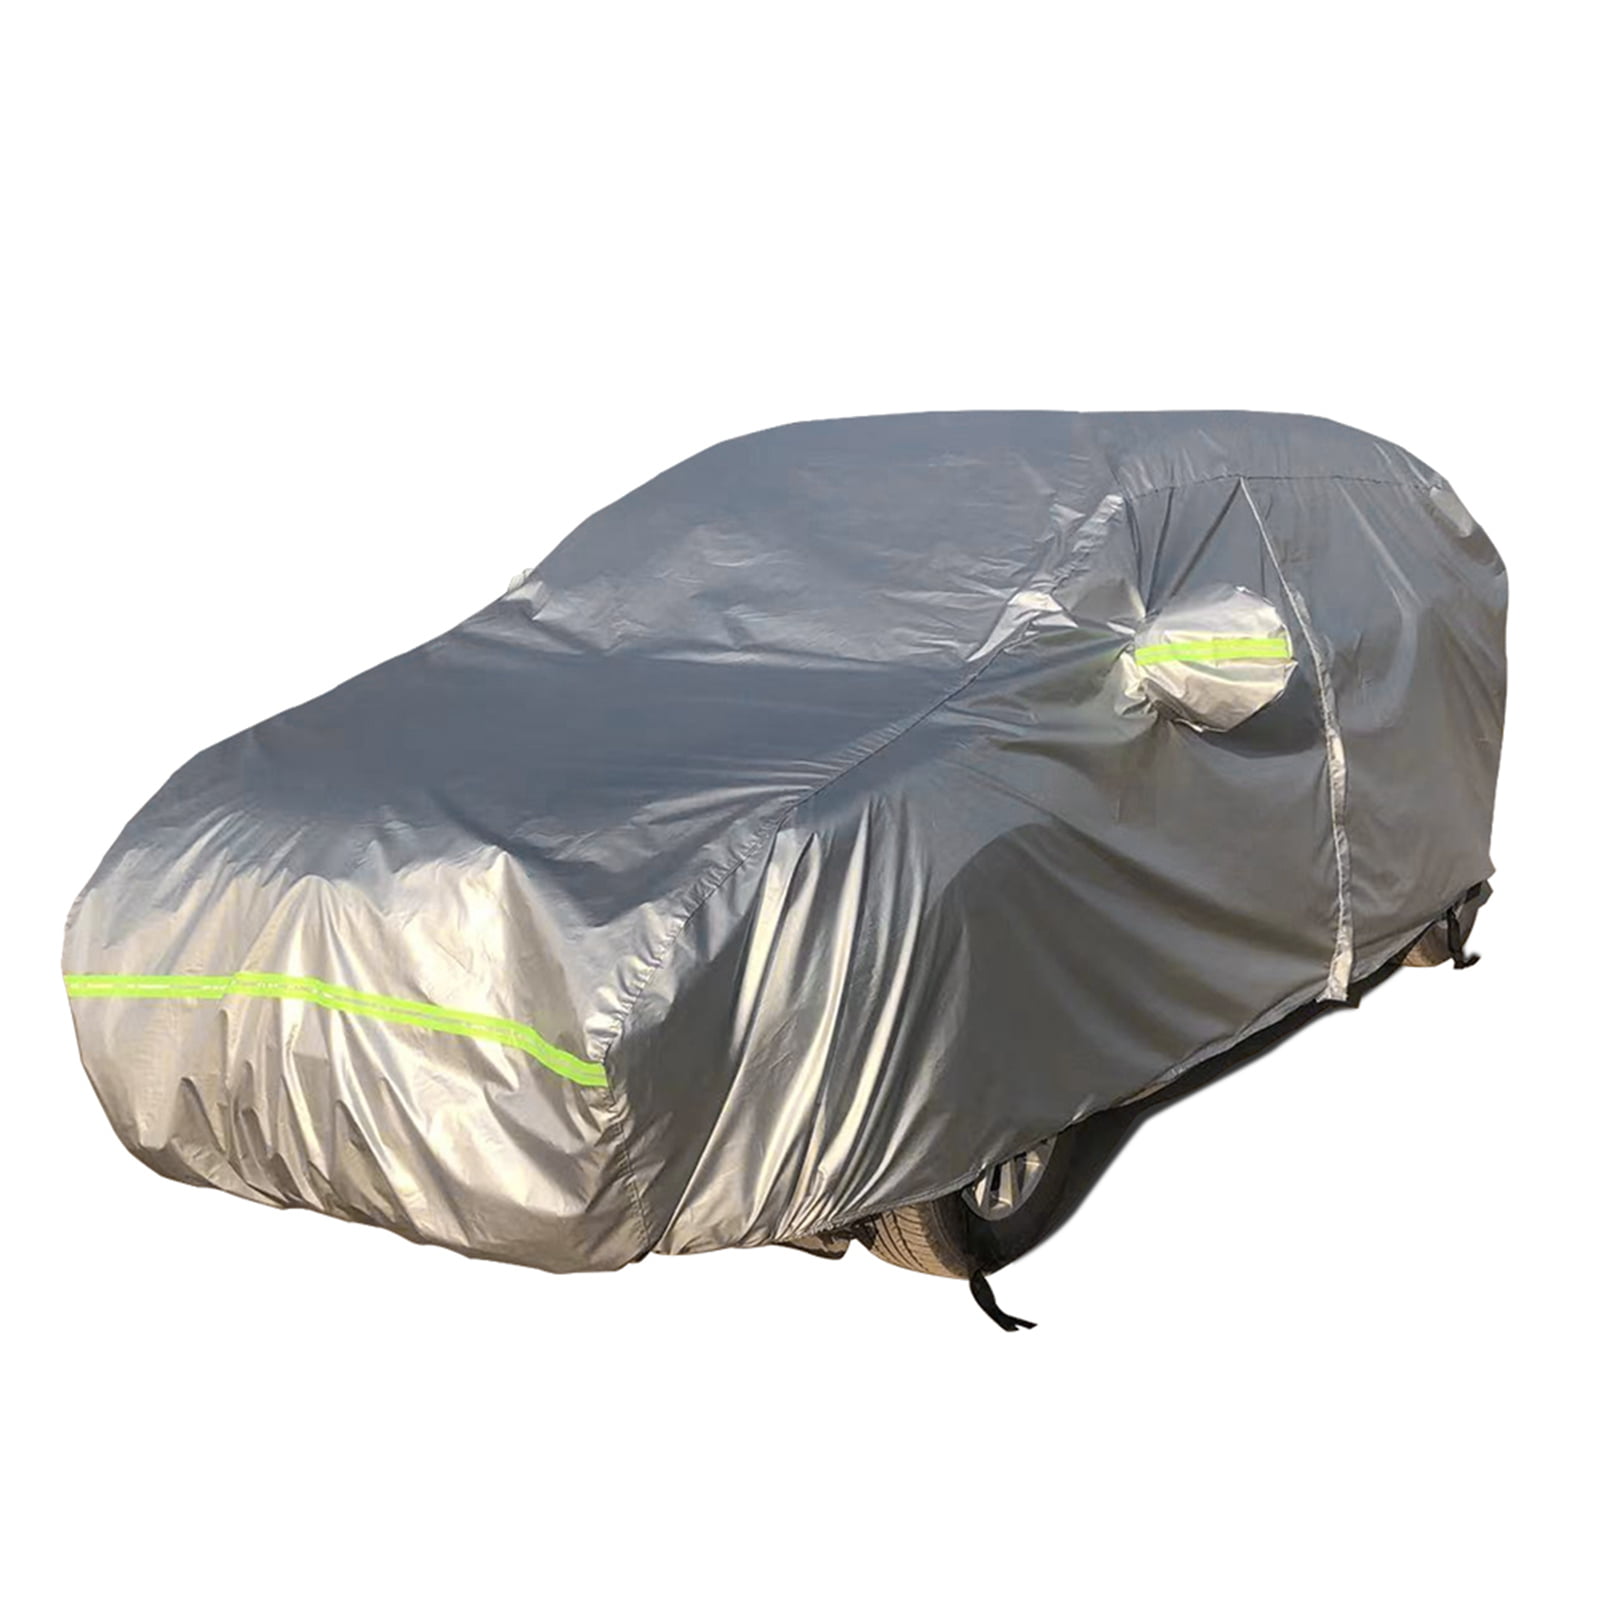 Car Cover Compatible with Mercedes Benz GLS Class GLS 450 Waterproof Car Cover Full Car Tarpaulin Outdoor Sunscreen Scratch Proof UV Protection Full Car Cover Silver Car Covers 